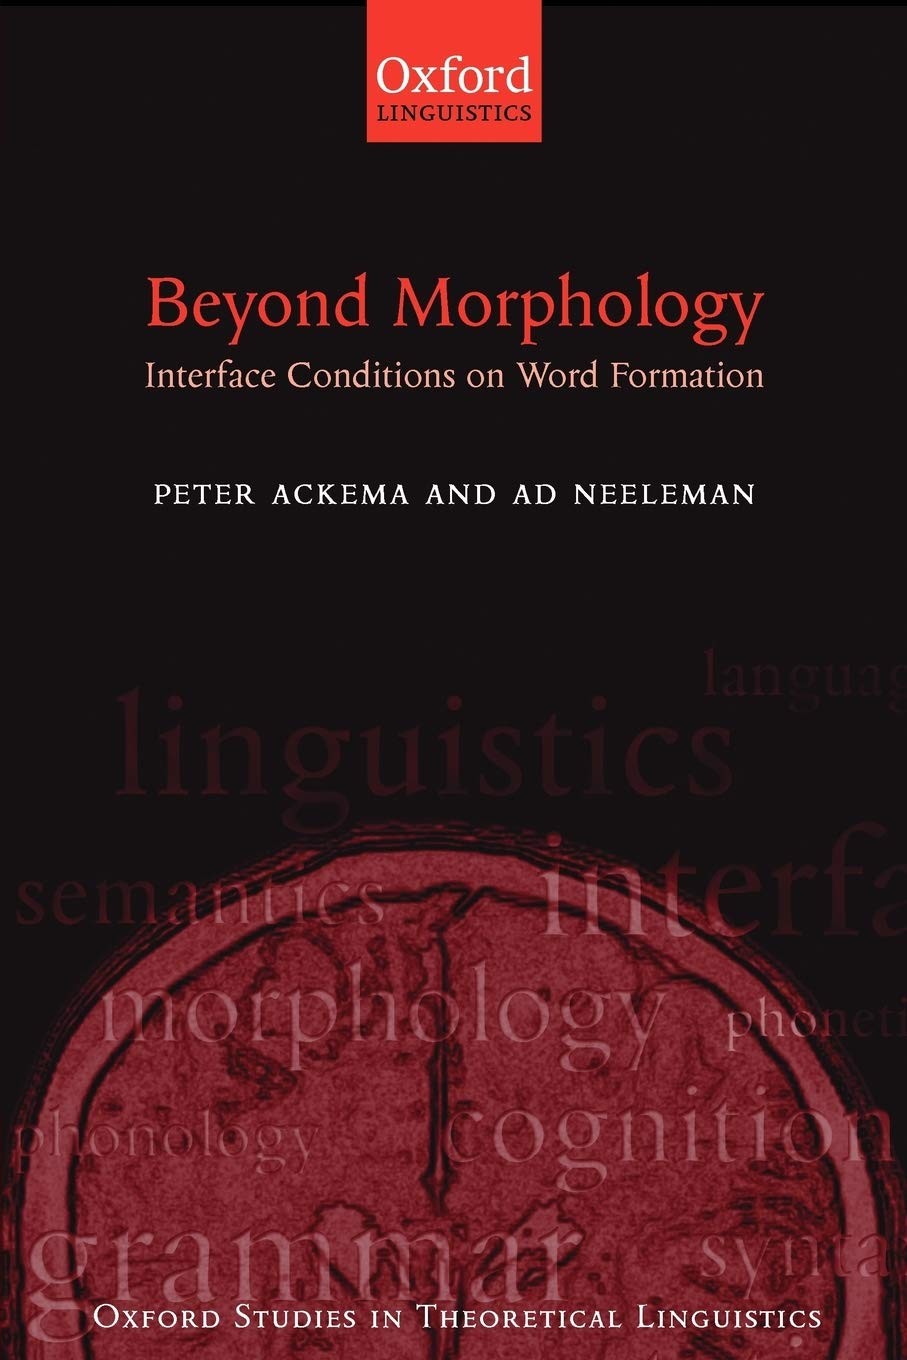 Beyond Morphology: Interface Conditions on Word Formation